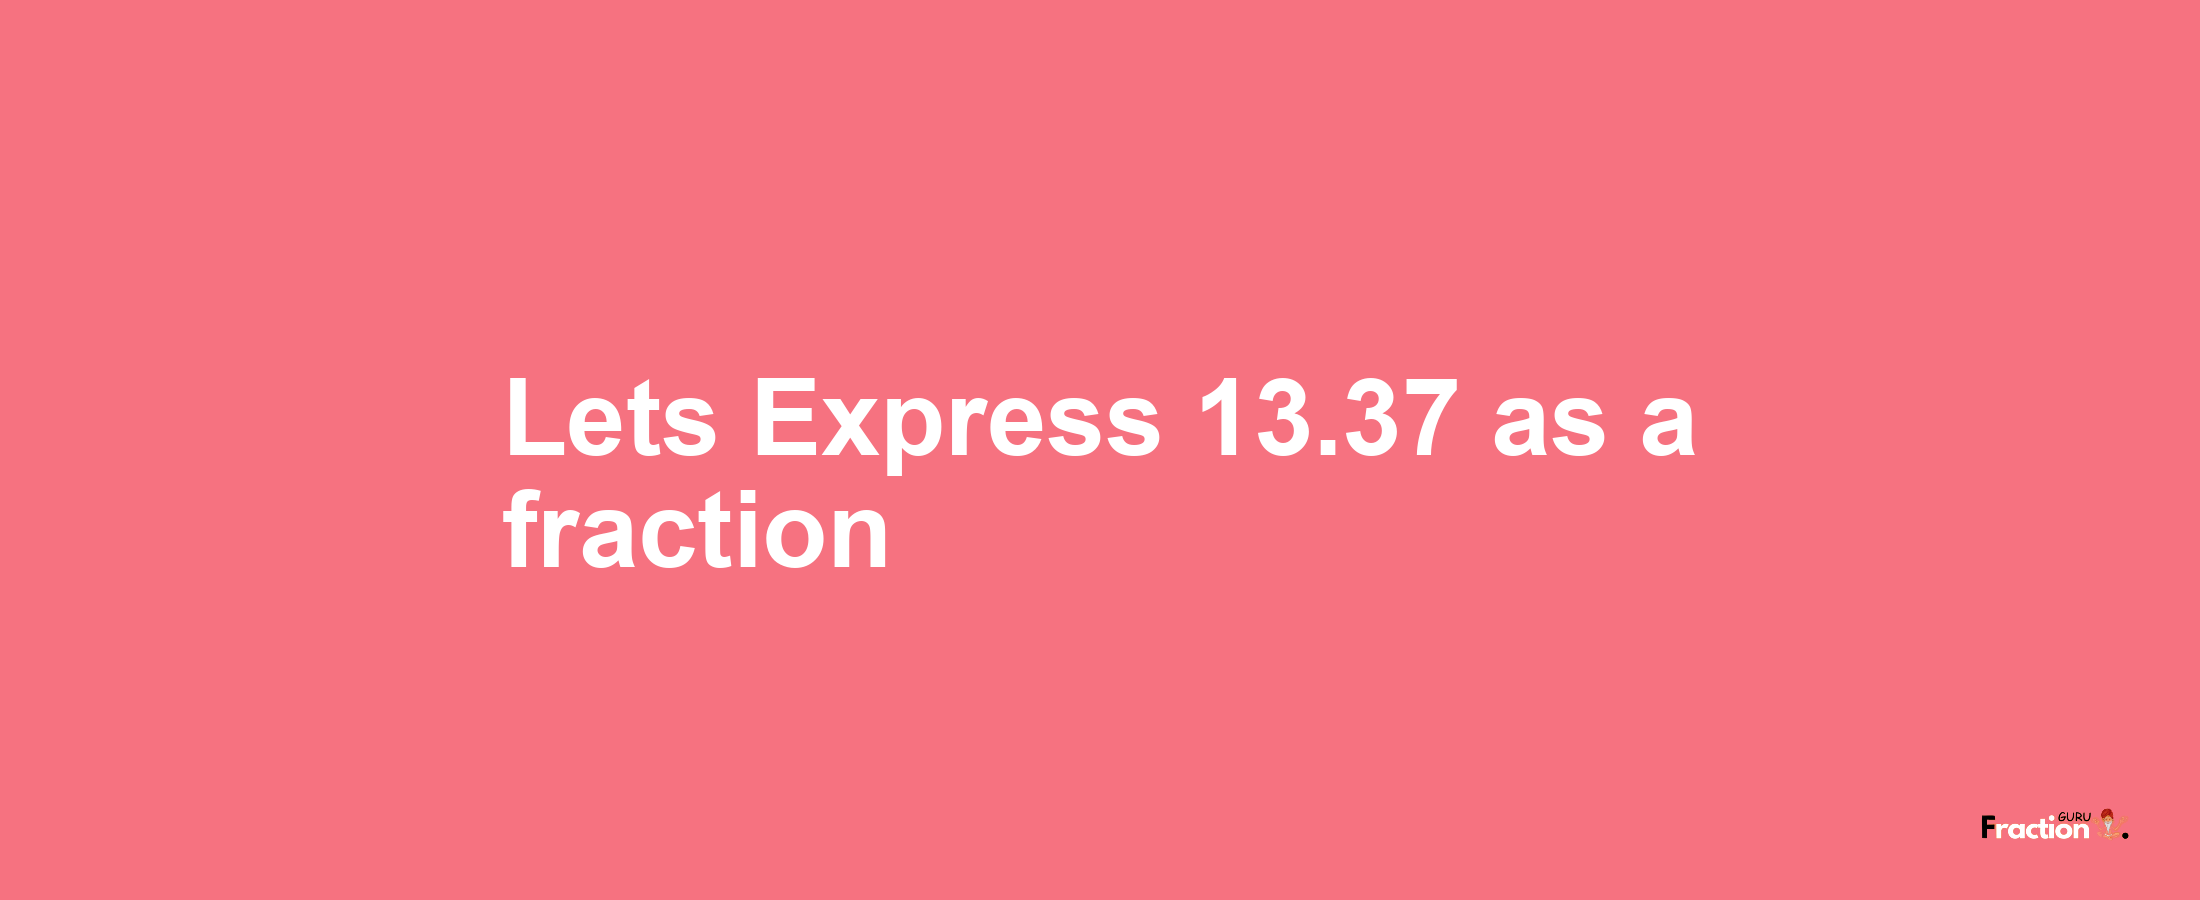 Lets Express 13.37 as afraction